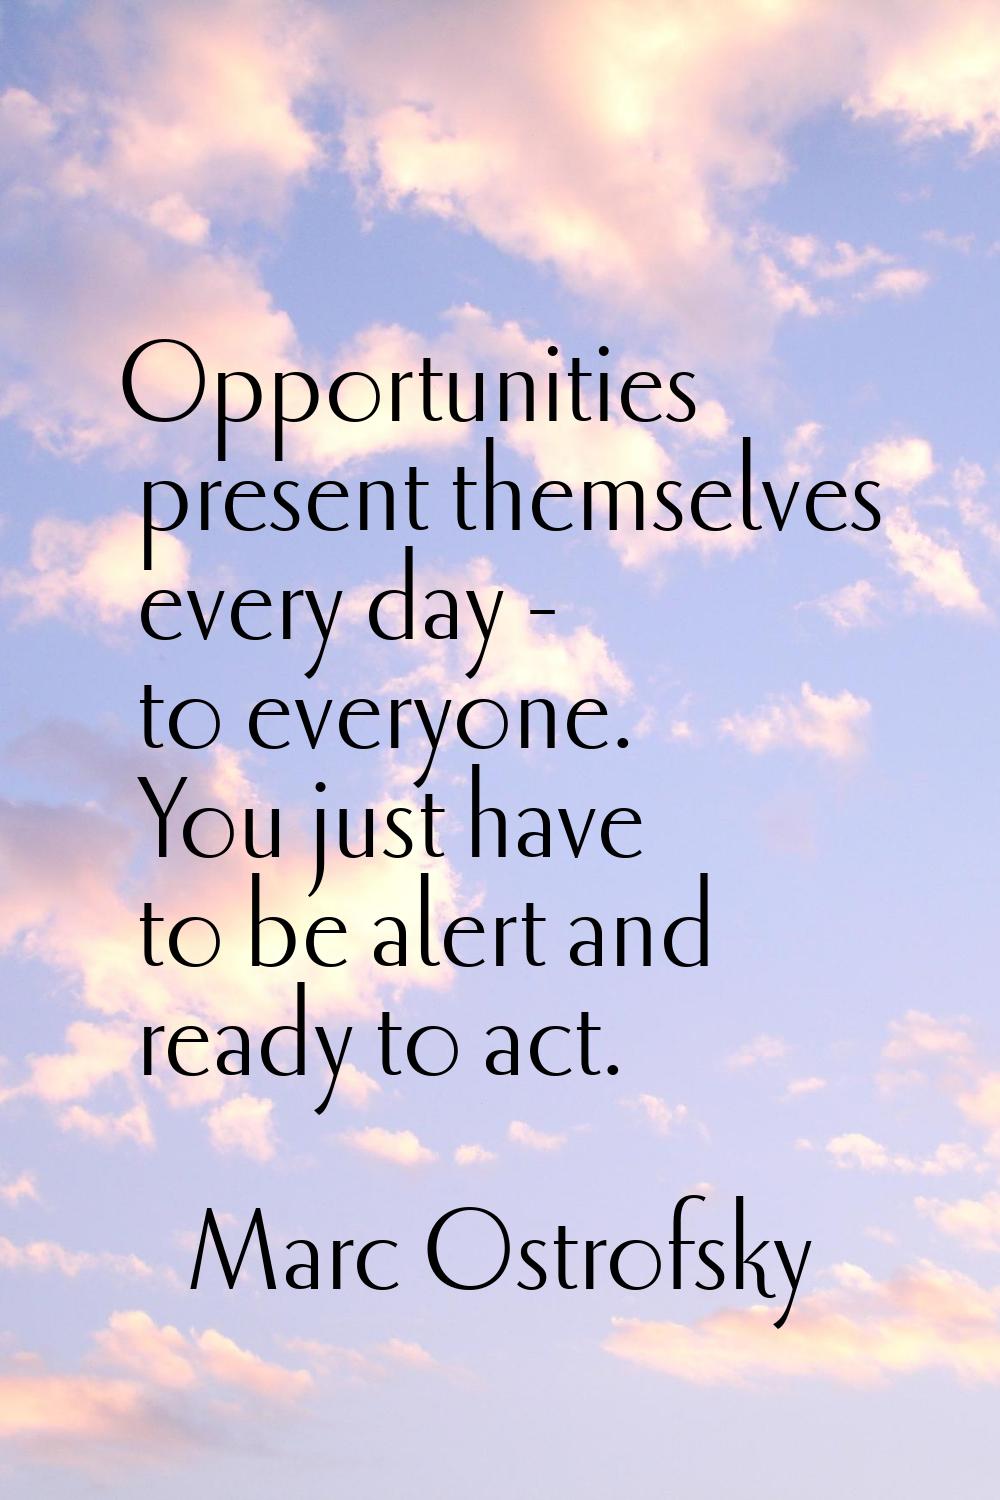 Opportunities present themselves every day - to everyone. You just have to be alert and ready to ac